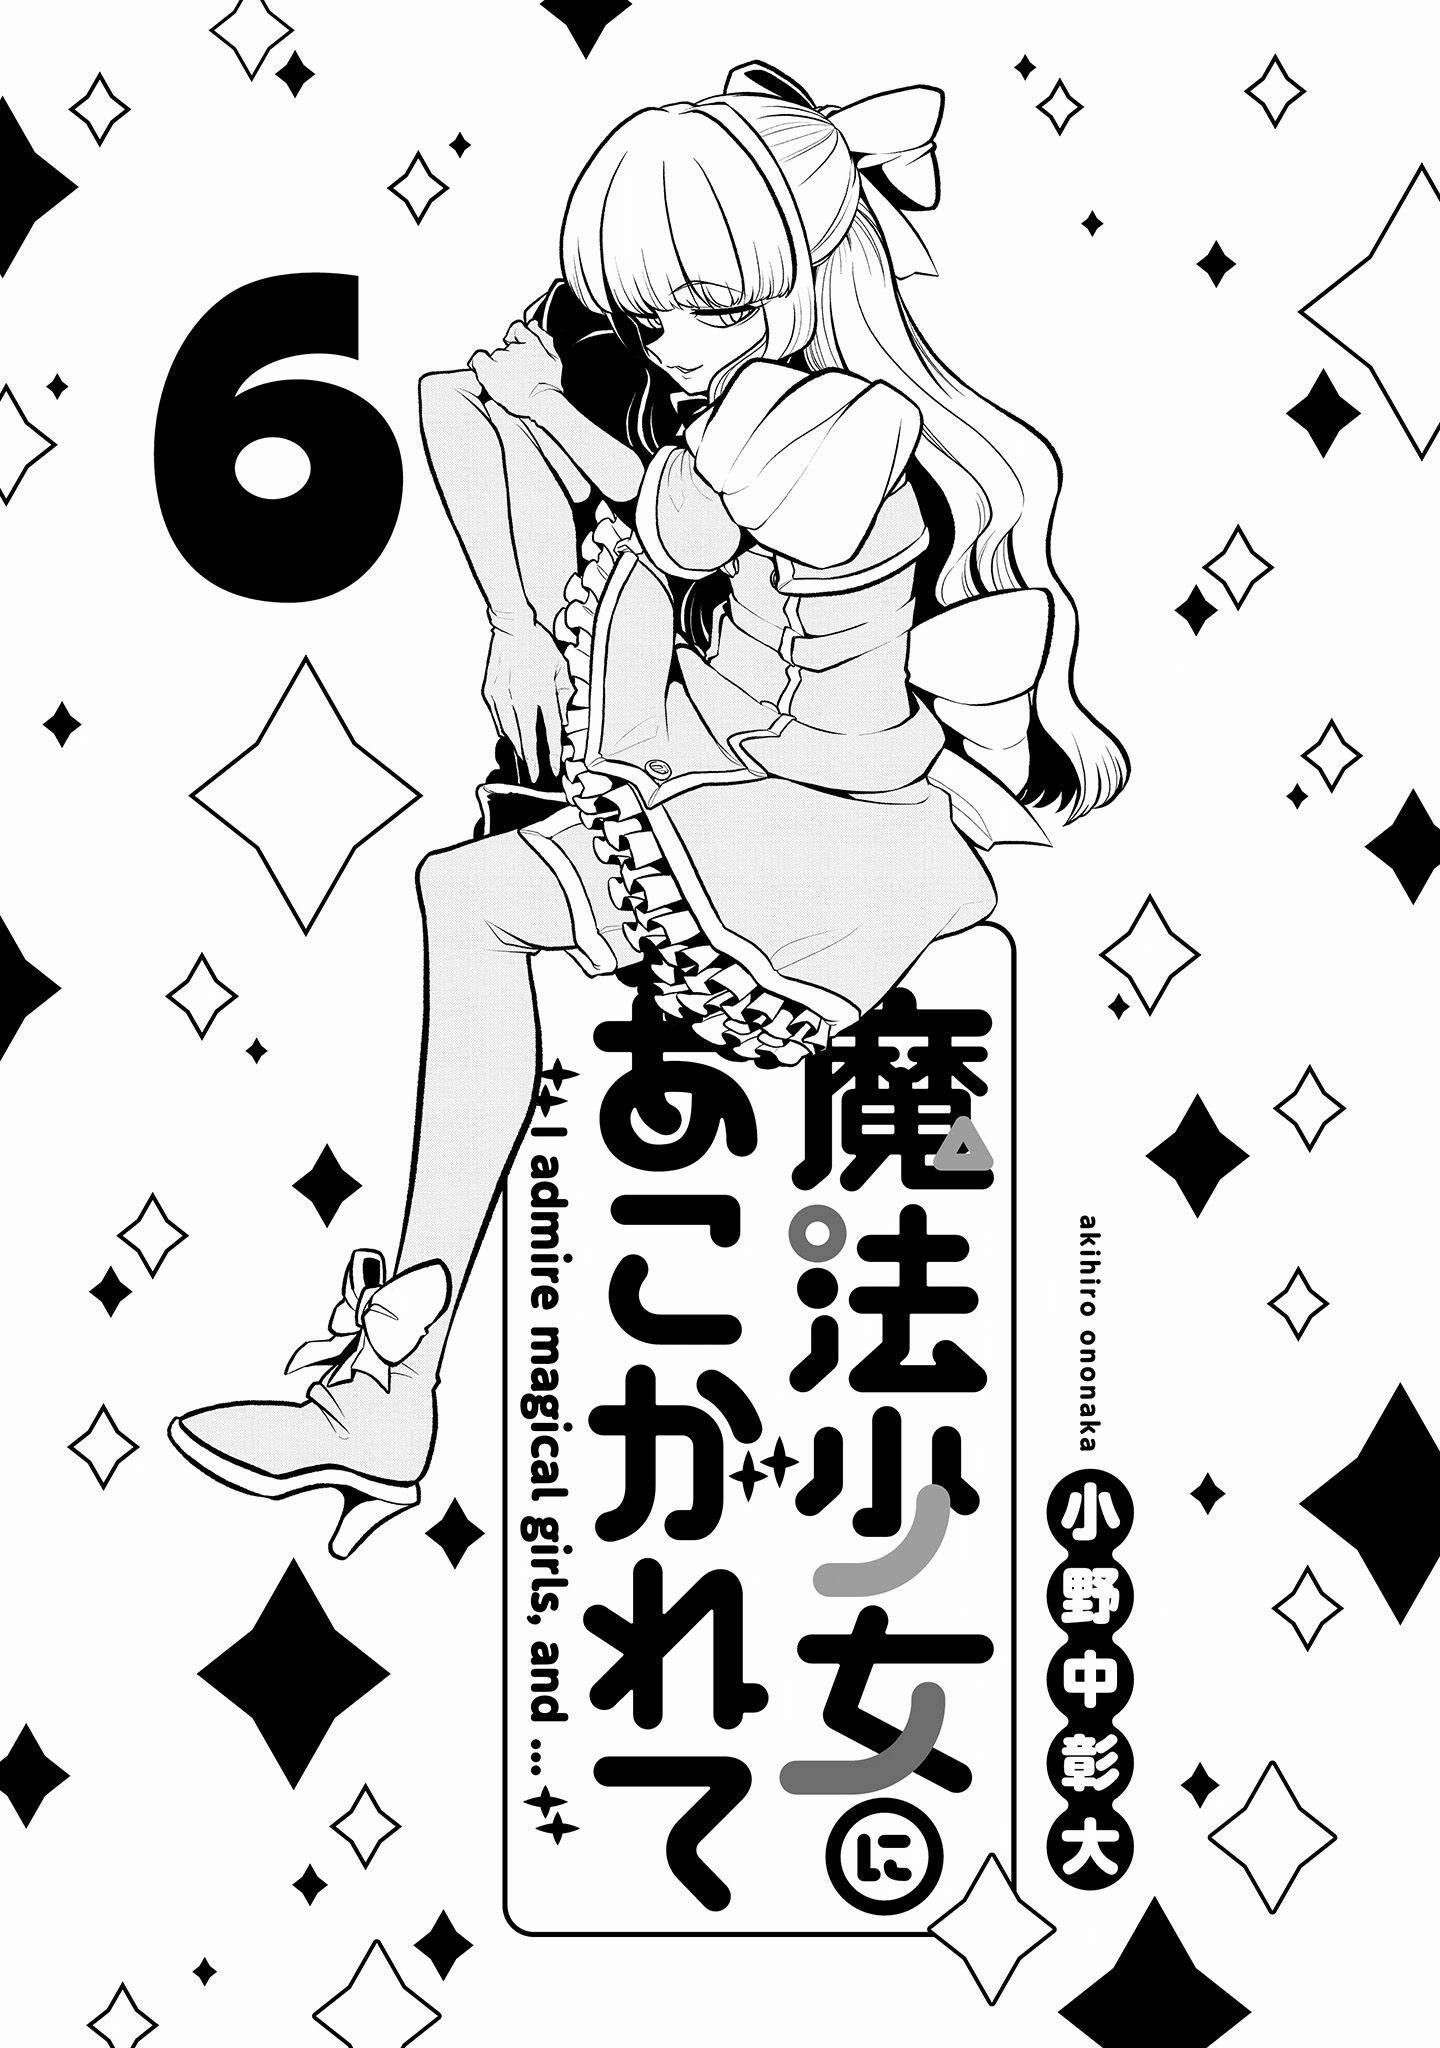 Gushing over Magical Girls - chapter 30.5 - #2